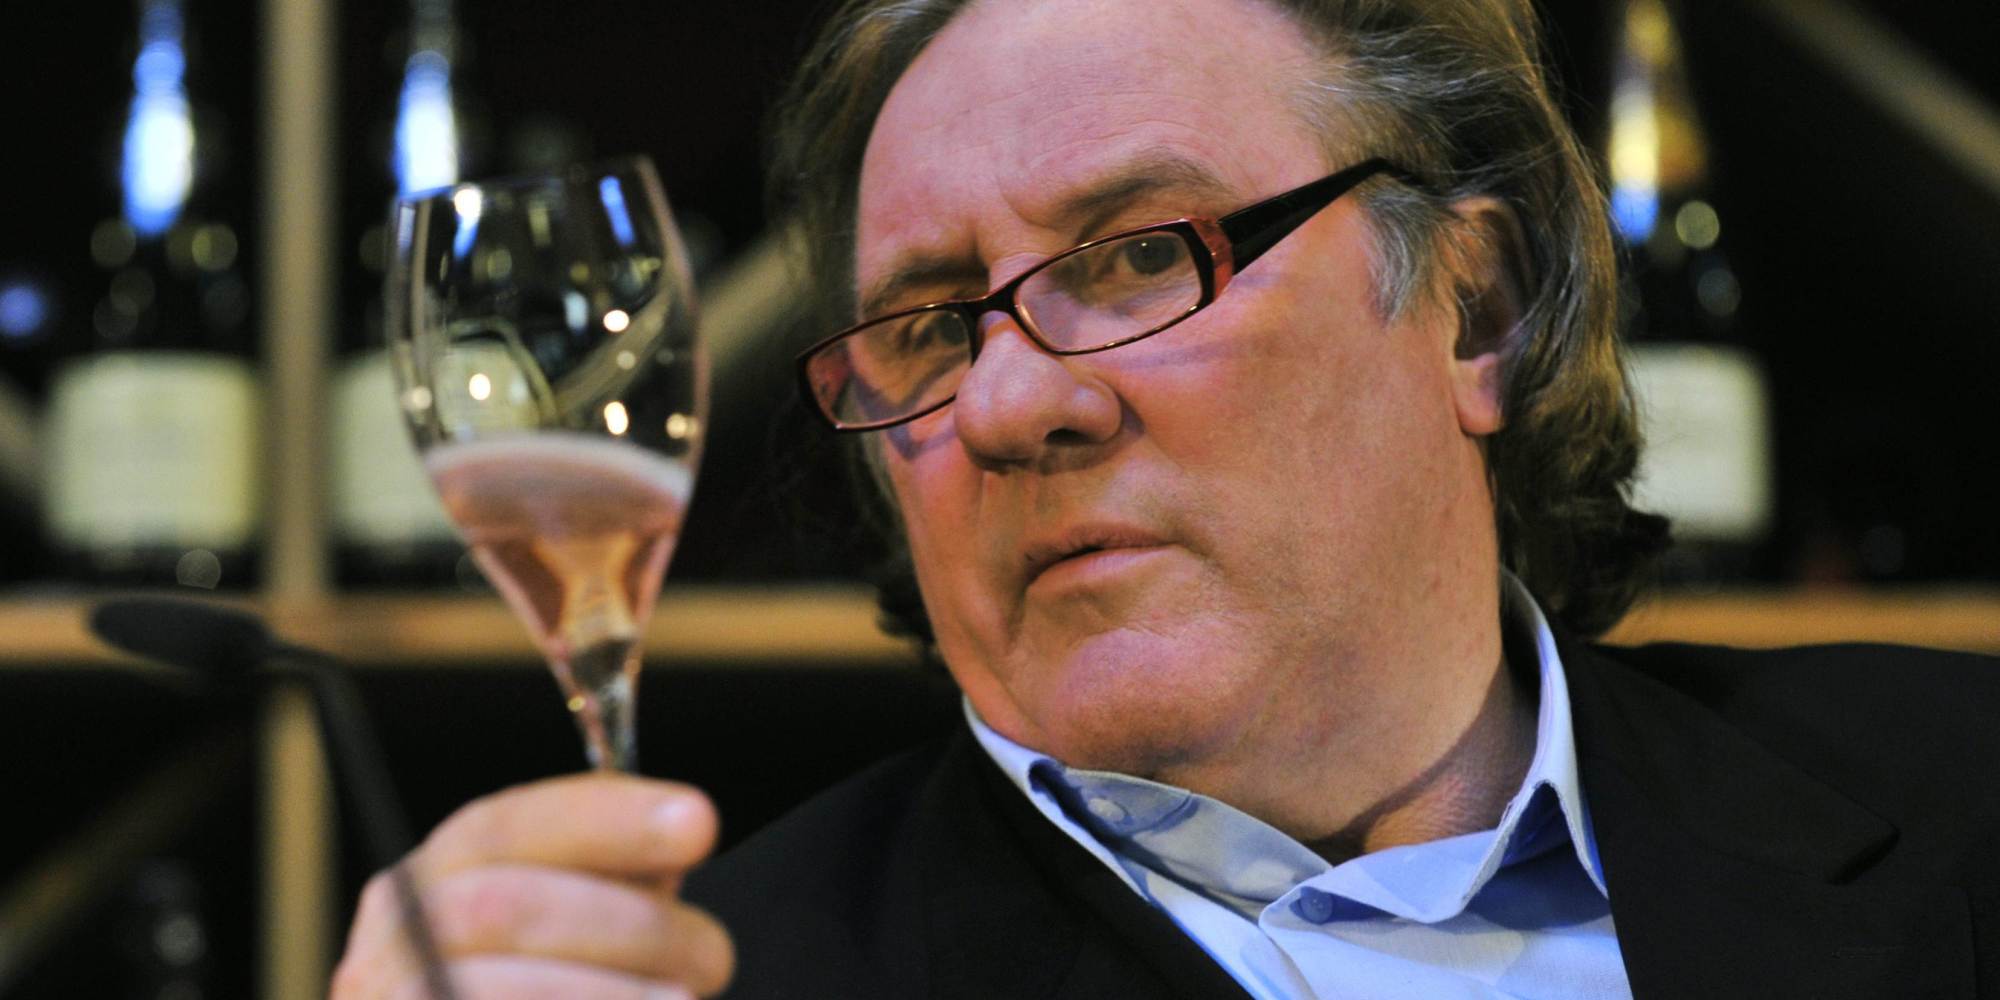 French actor Gerard Depardieu holds up a sample of his sparkling rose wine during a wine presentation in a Berlin wine shop November 30, 2010. Depardieu presented his "Taille Princesse" Brut, by Bouvet-Laduray, which the actor helped elaborate. AFP PHOTO / JOHN MACDOUGALL (Photo credit should read JOHN MACDOUGALL/AFP/Getty Images)